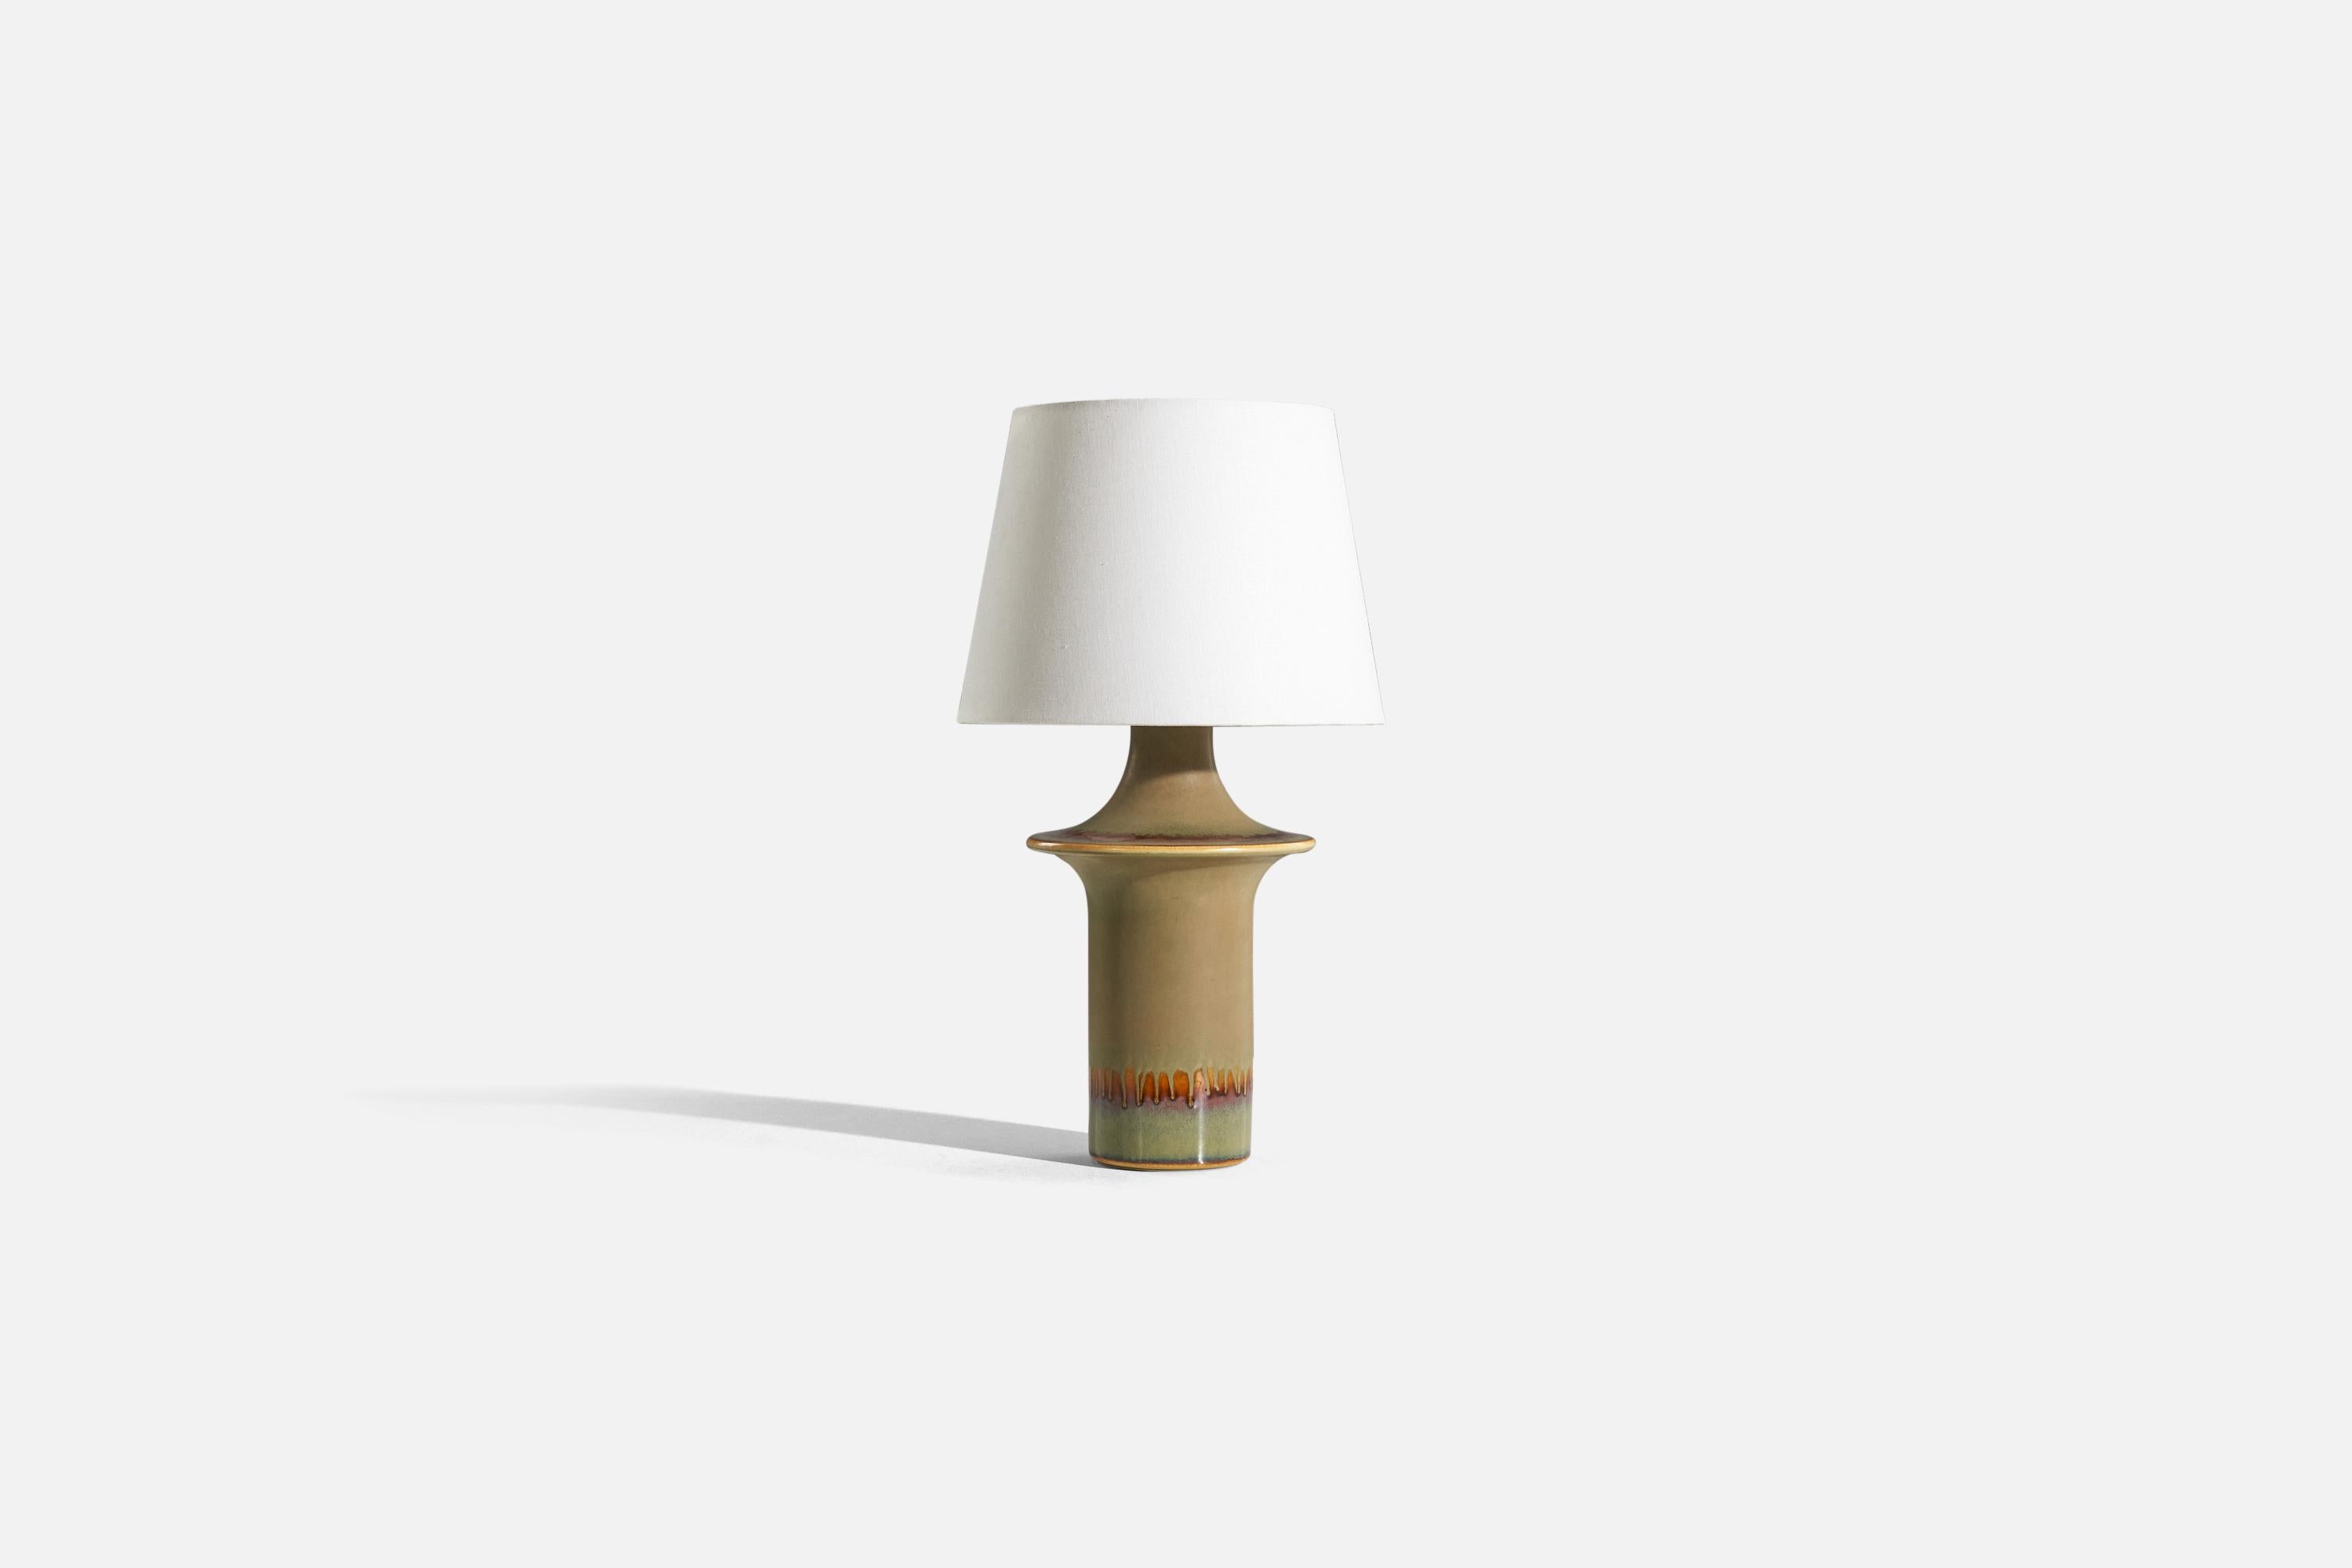 A green and beige, glazed stoneware table lamp designed and produced by Søholm Stentøj, Denmark, 1960s.

Sold without lampshade. 
Dimensions of Lamp (inches) : 17.25 x 8.125 x 8.125 (H x W x D)
Dimensions of Shade (inches) : 9 x 12.125 x 8.875 (T x